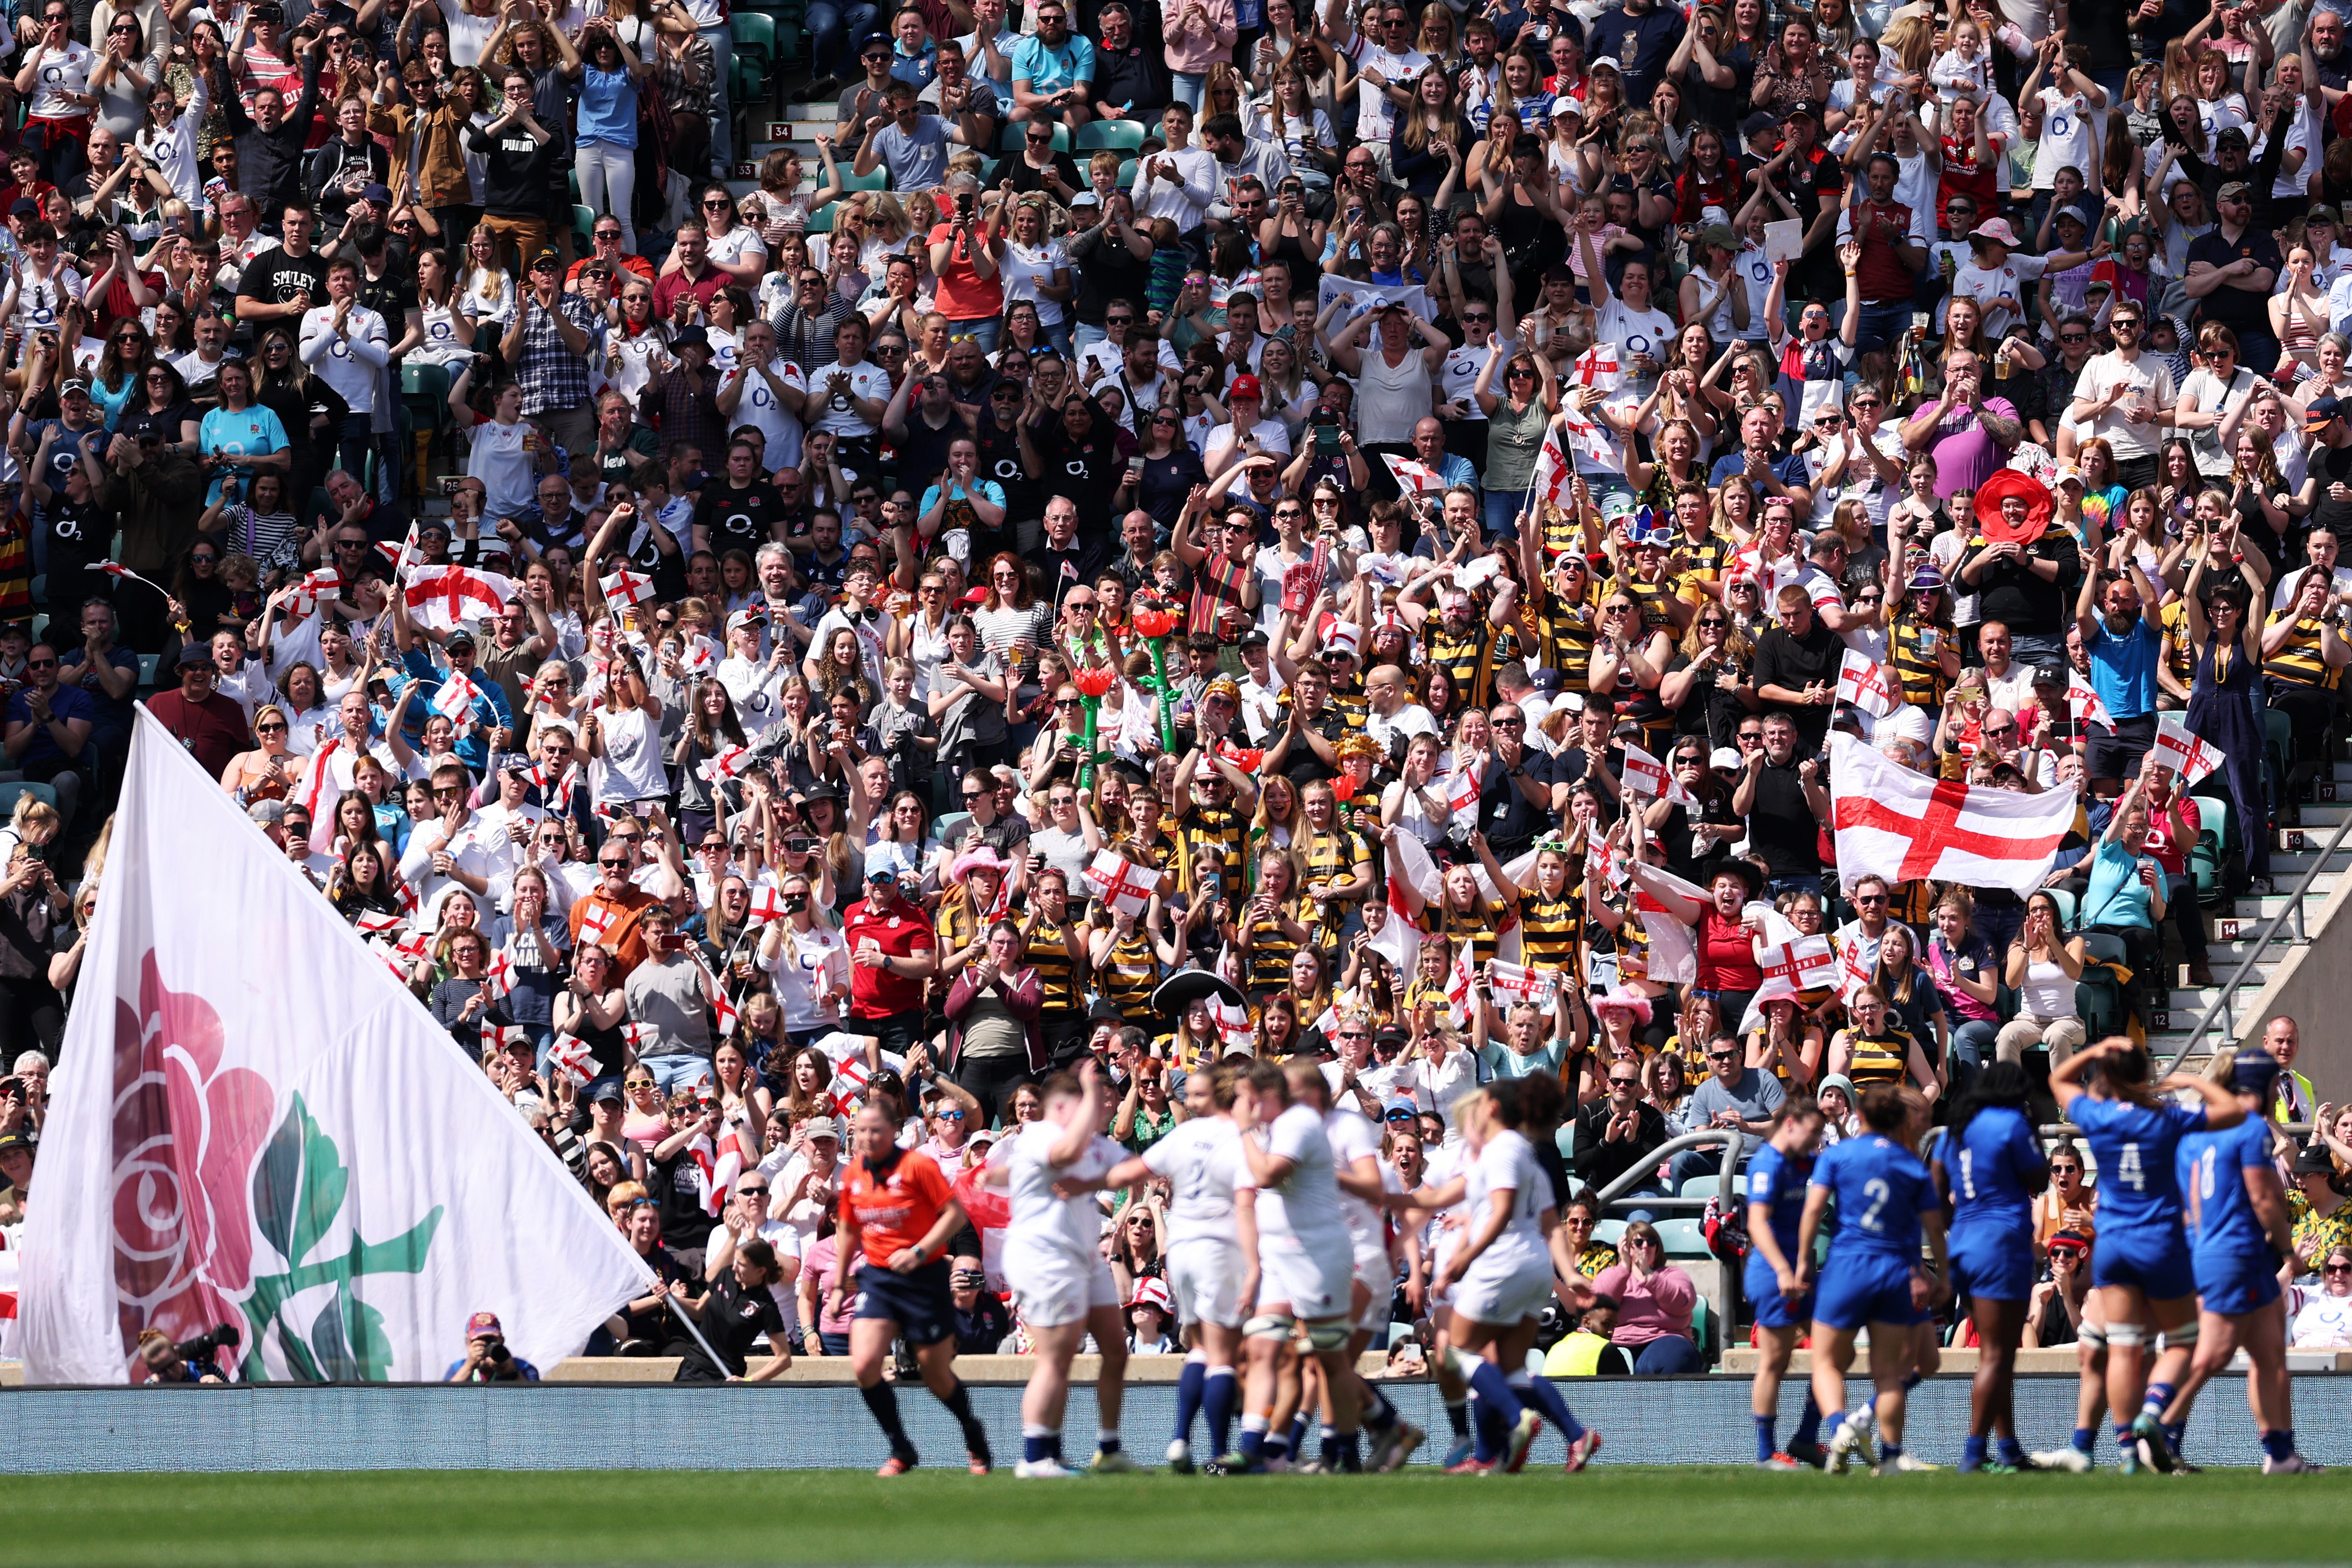 The Red Roses return to Twickenham with another big crowd expected